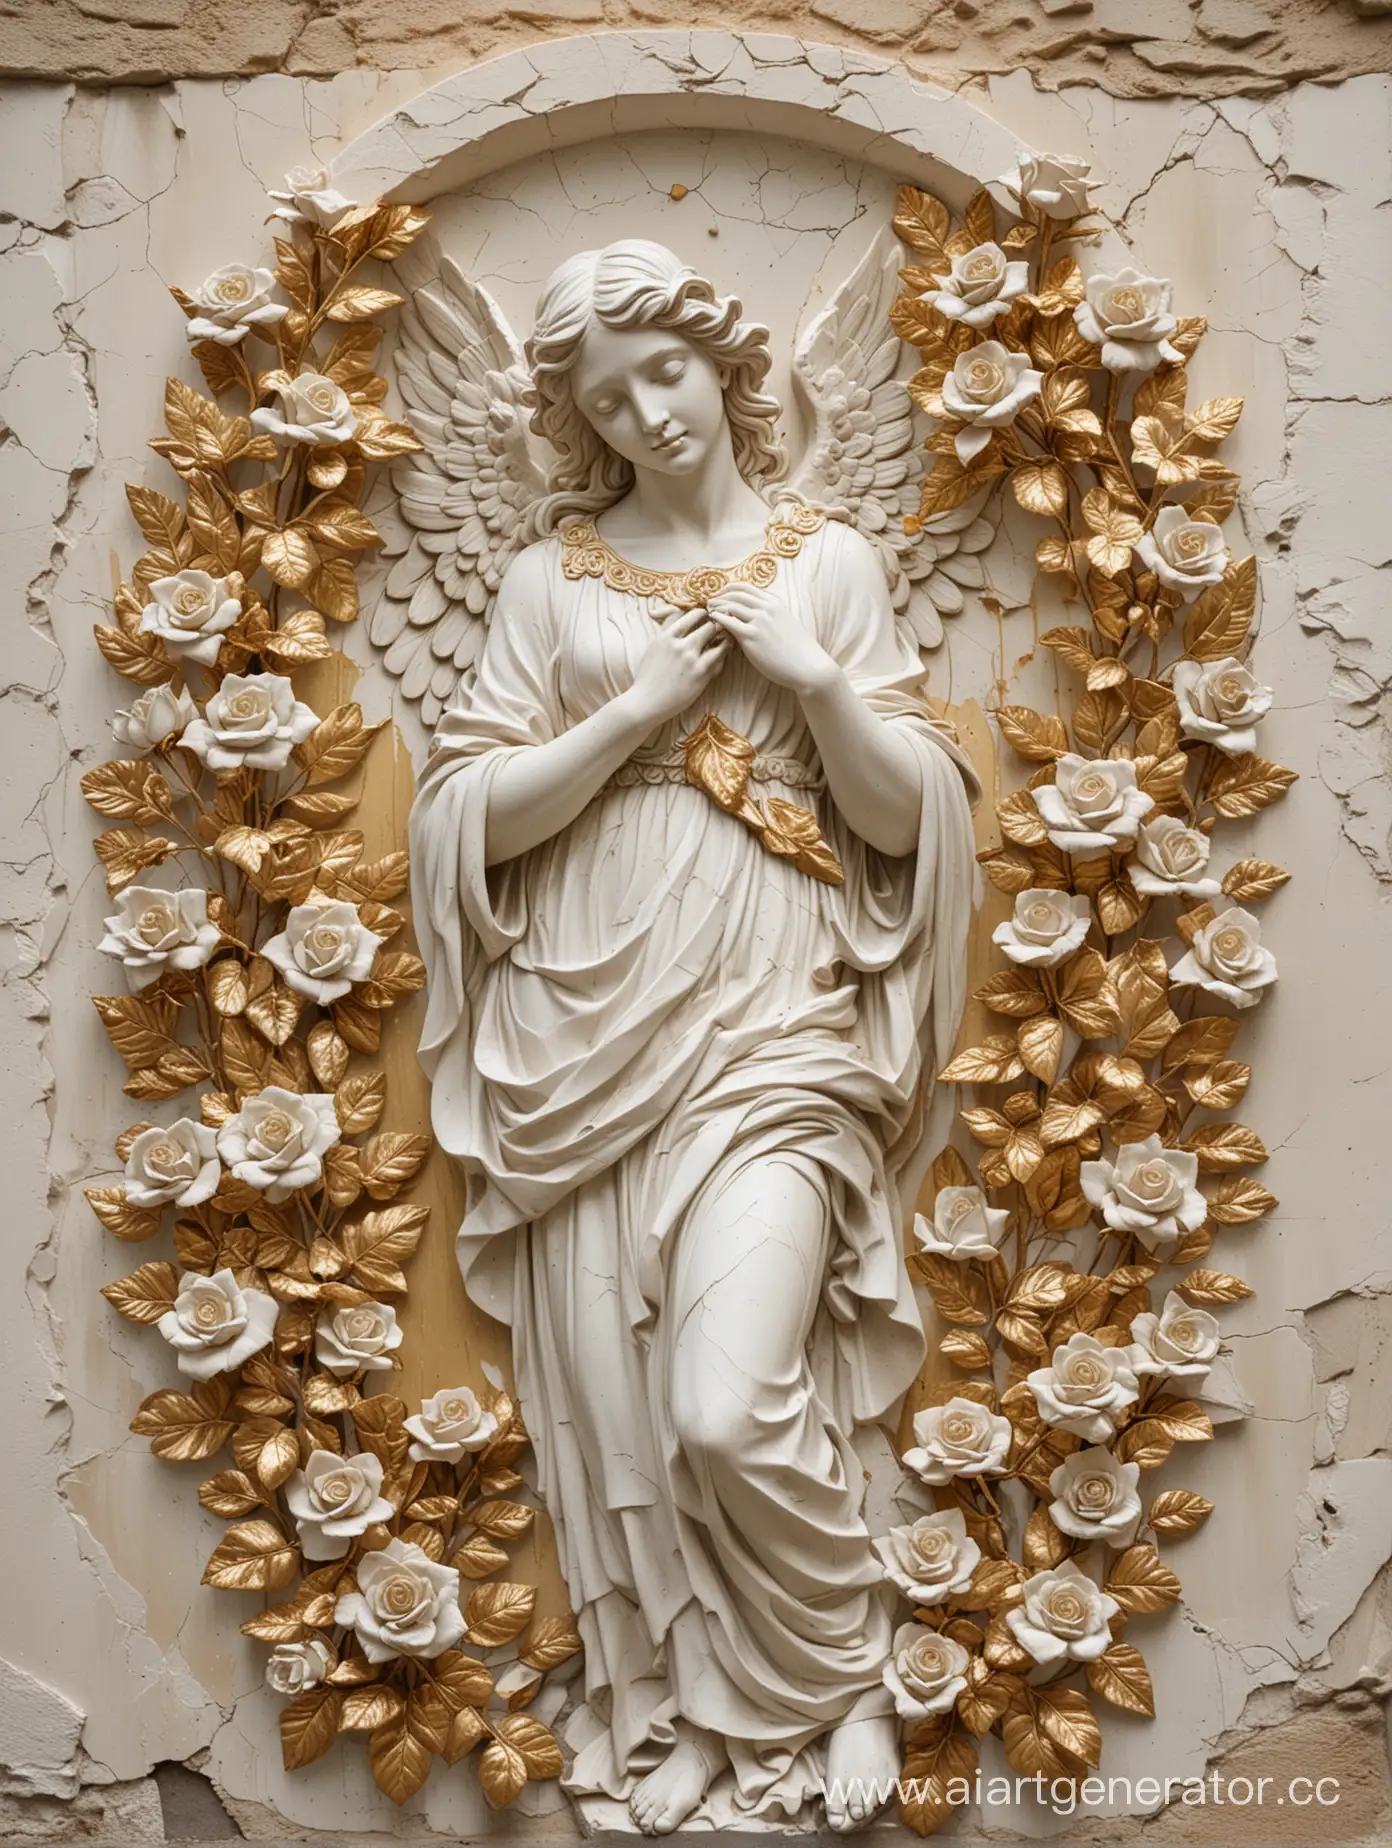 white basrelief sculpture of stoned angel on cracked stucco wall and huge gold roses flowers